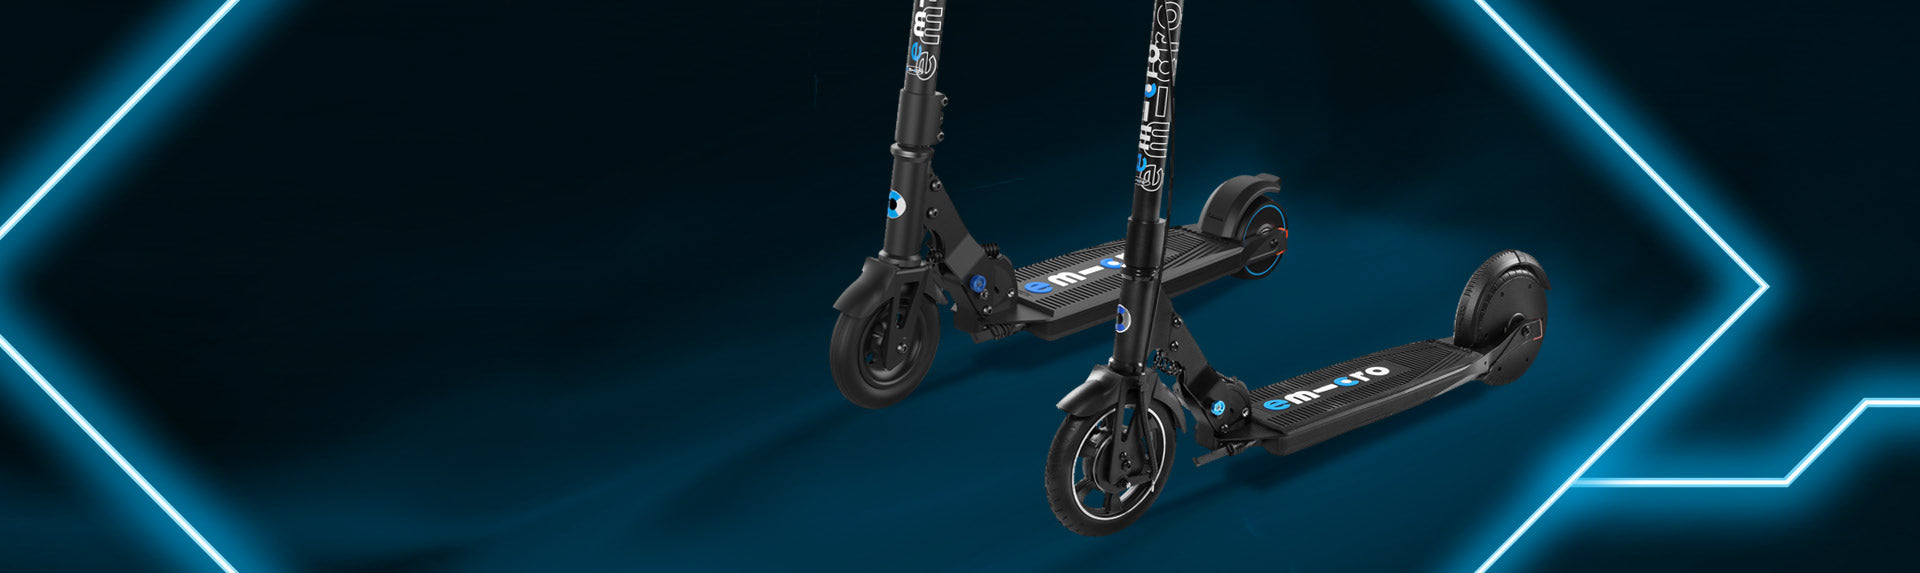 BEST ELECTRIC SCOOTER FOR ADULTS